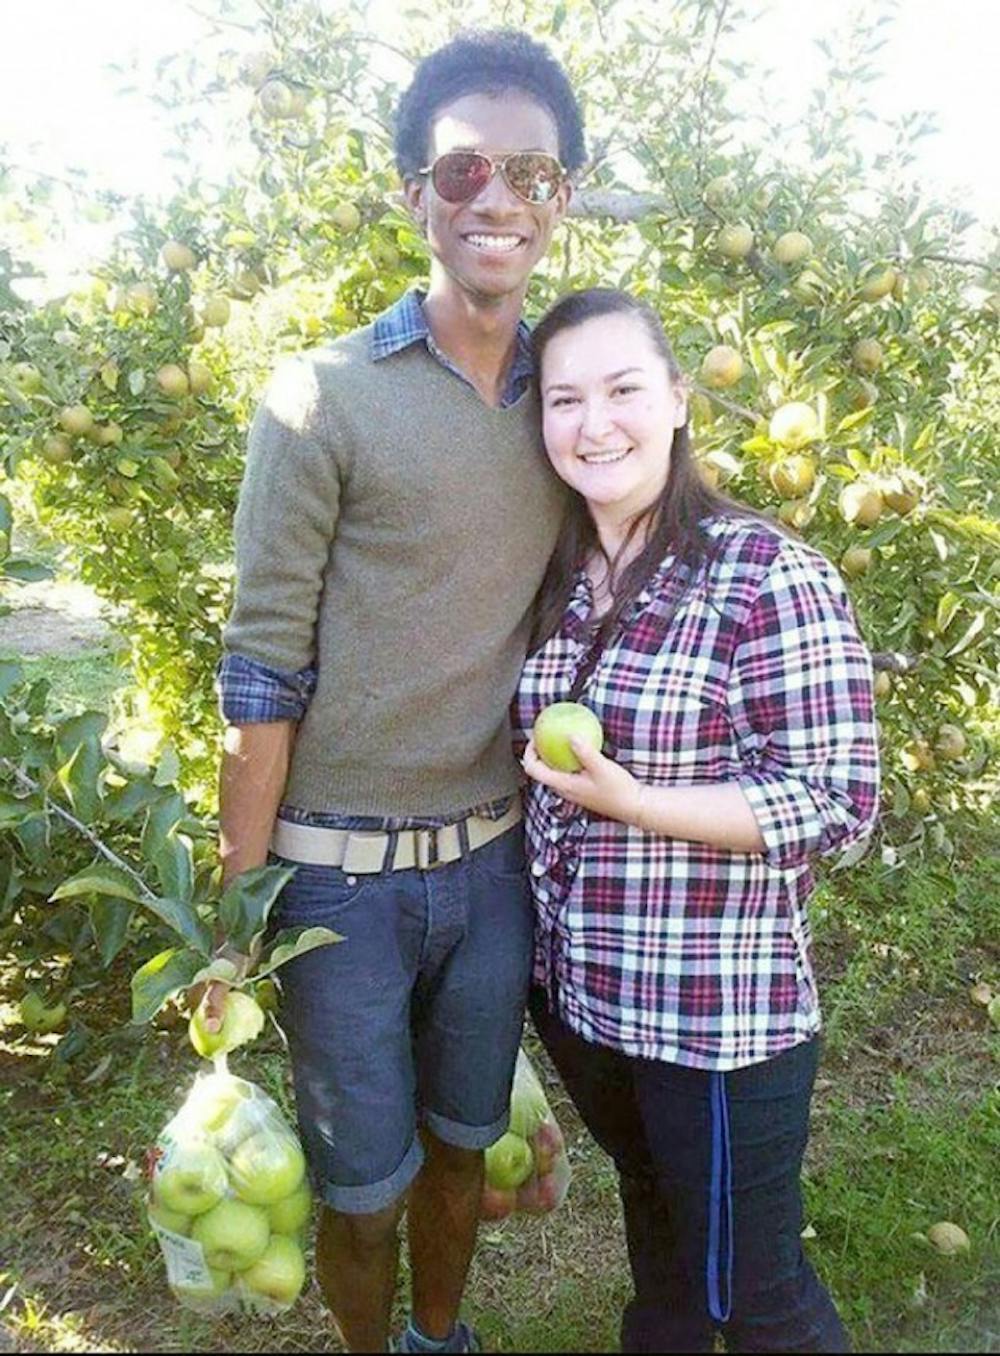 Elizabeth Chestnut, a senior French and Spanish major, and Stephen Wah, a recently graduated Interdisciplinary Degree Programs Social Sciences major, met and bonded during French class. Last fall, they went apple picking at Becker Farms.&nbsp;Courtesy of Elizabeth Chestnut&nbsp;